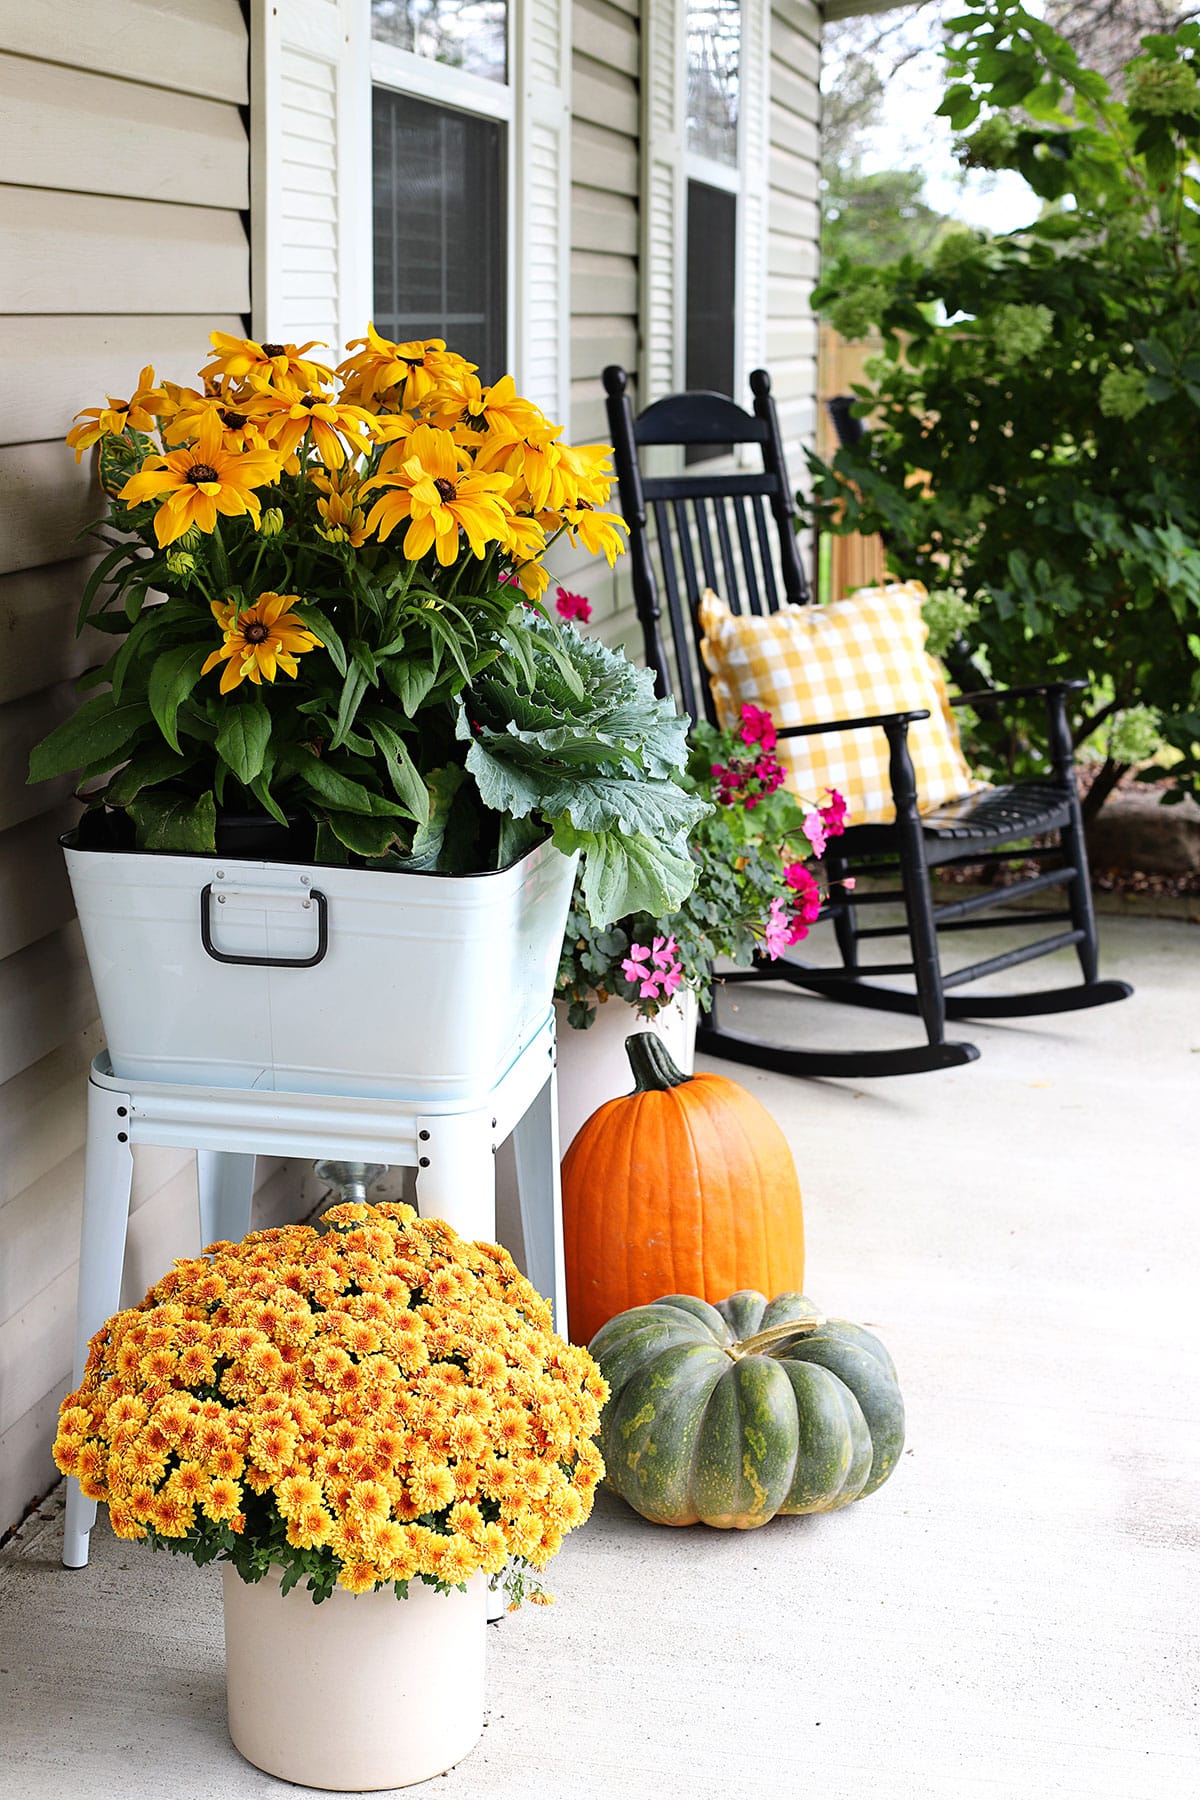 Side view of Back-eyed Susan, ornamental cabbage and crotons in an enamelware wash tub for fall porch decor. A black rocker with yellow buffalo check pillow in the background.